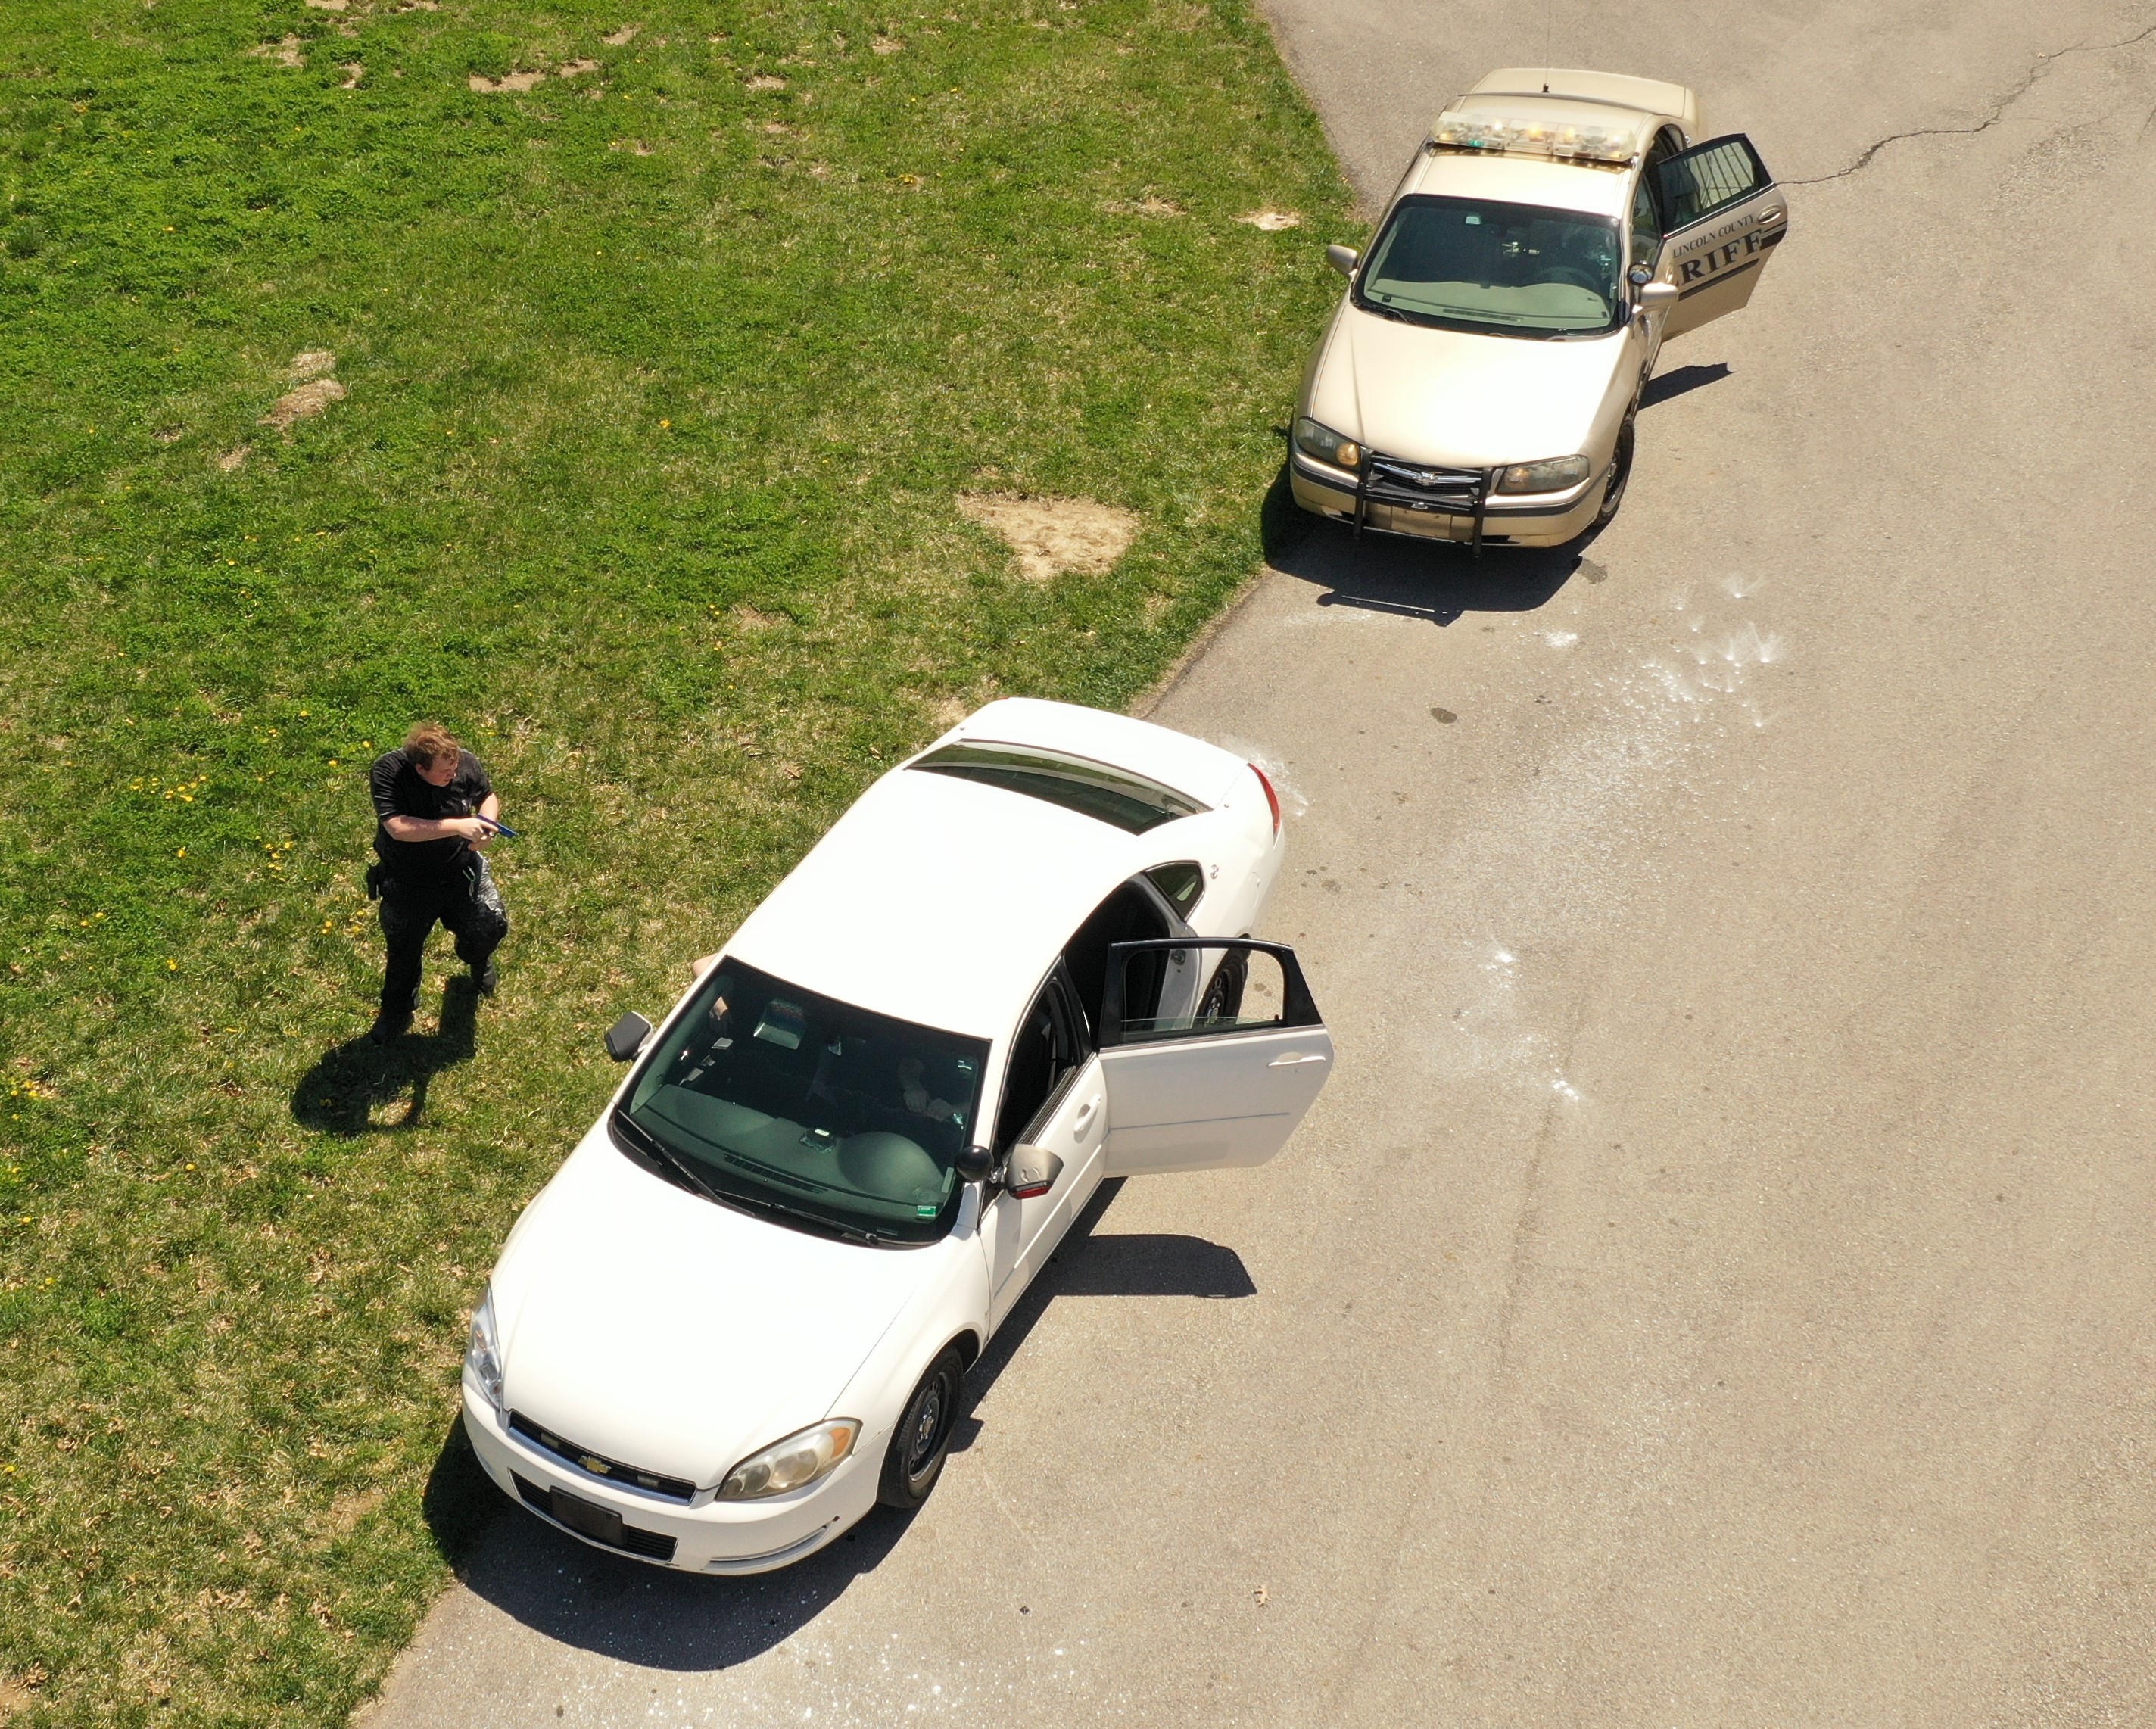 Aerial view of police car at a traffic stop